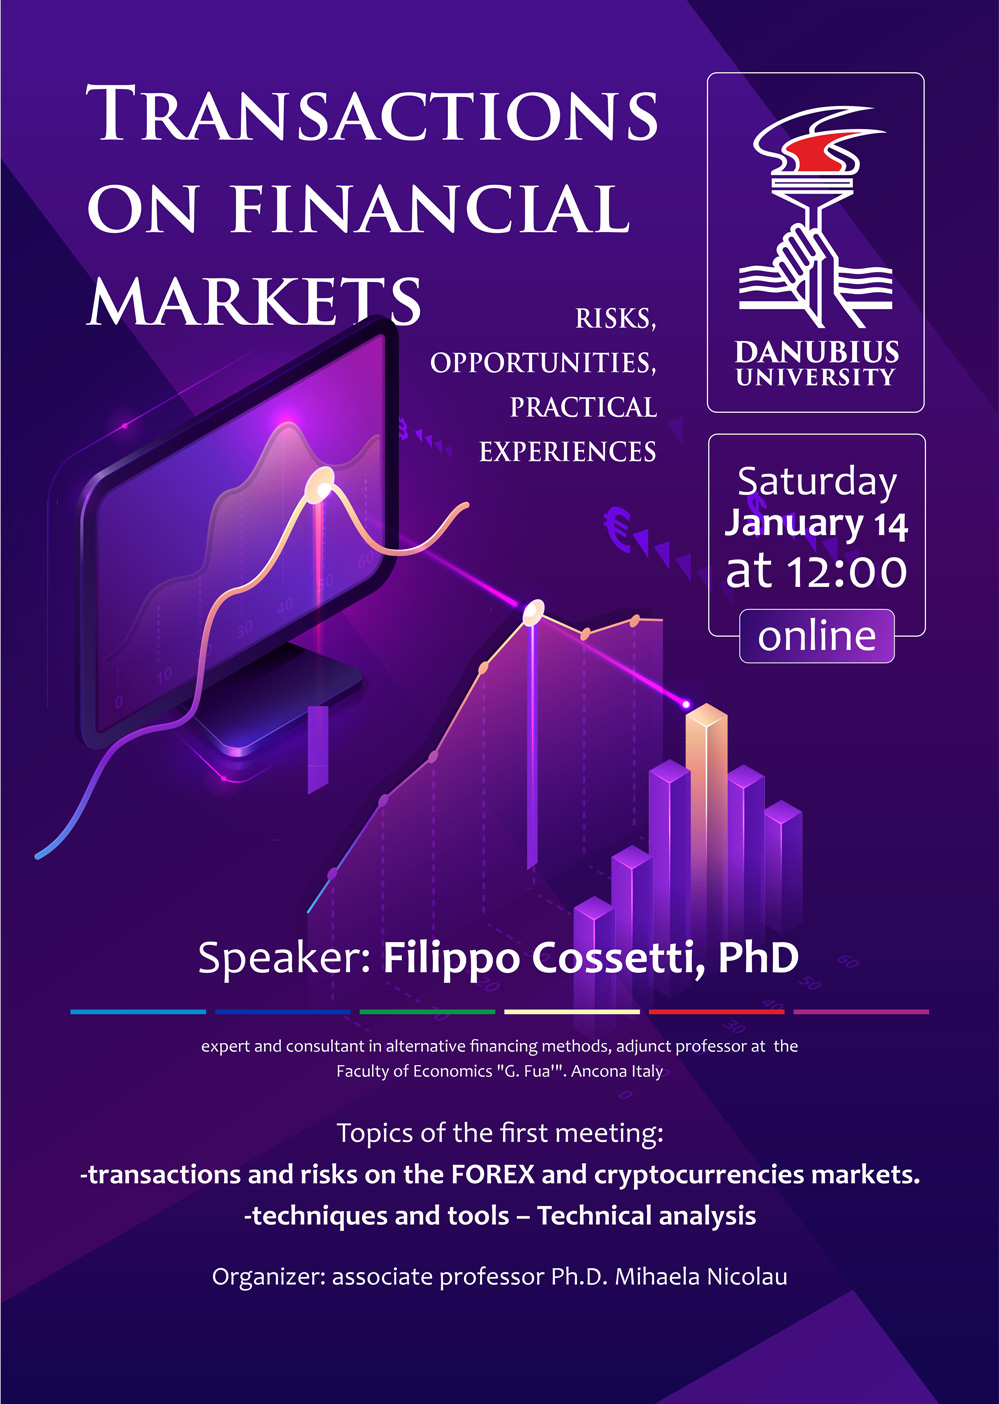 Transactions on financial markets - opportunities, risks, practical experiences